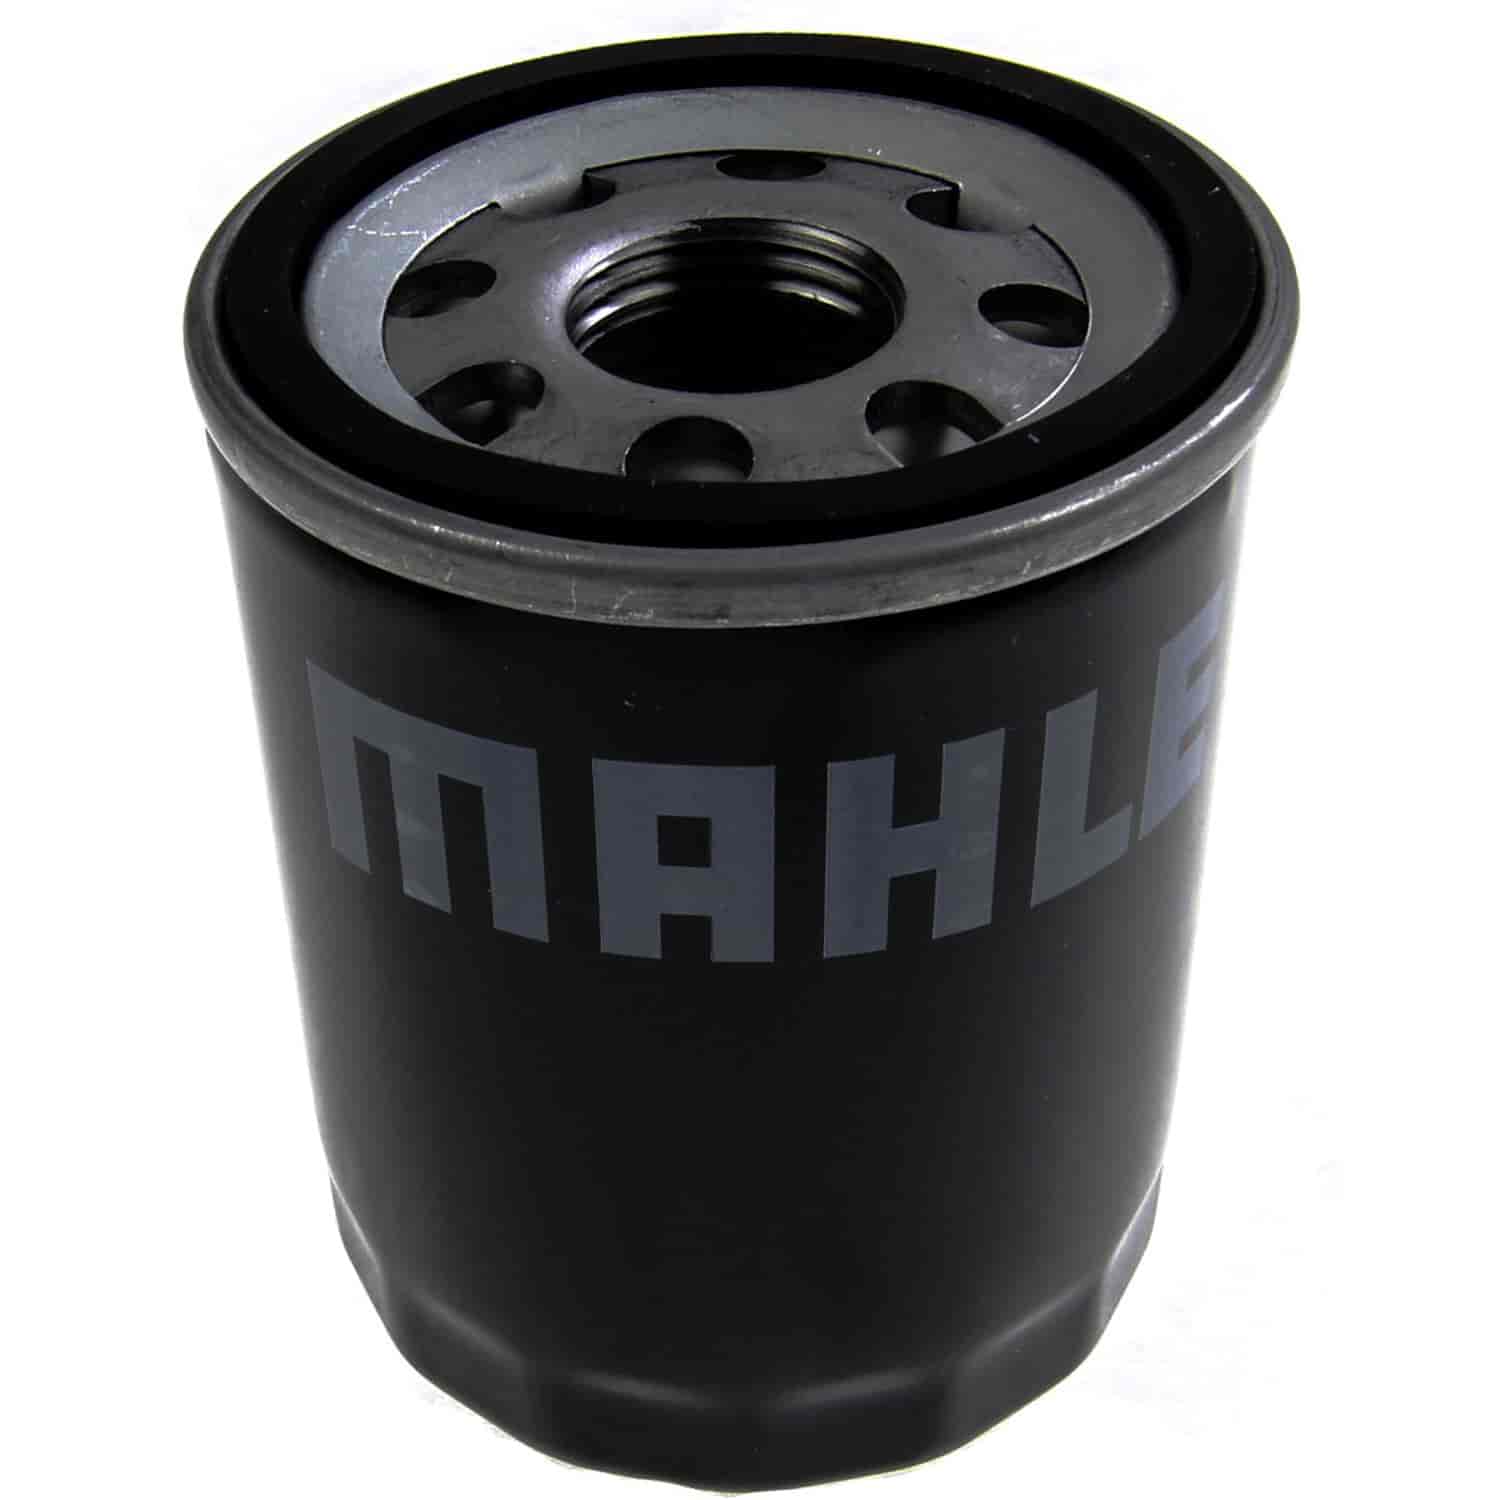 Mahle Oil Filter Ford Thunderbird 03-05 Lincoln LS 02-06 Land Rover 05-09